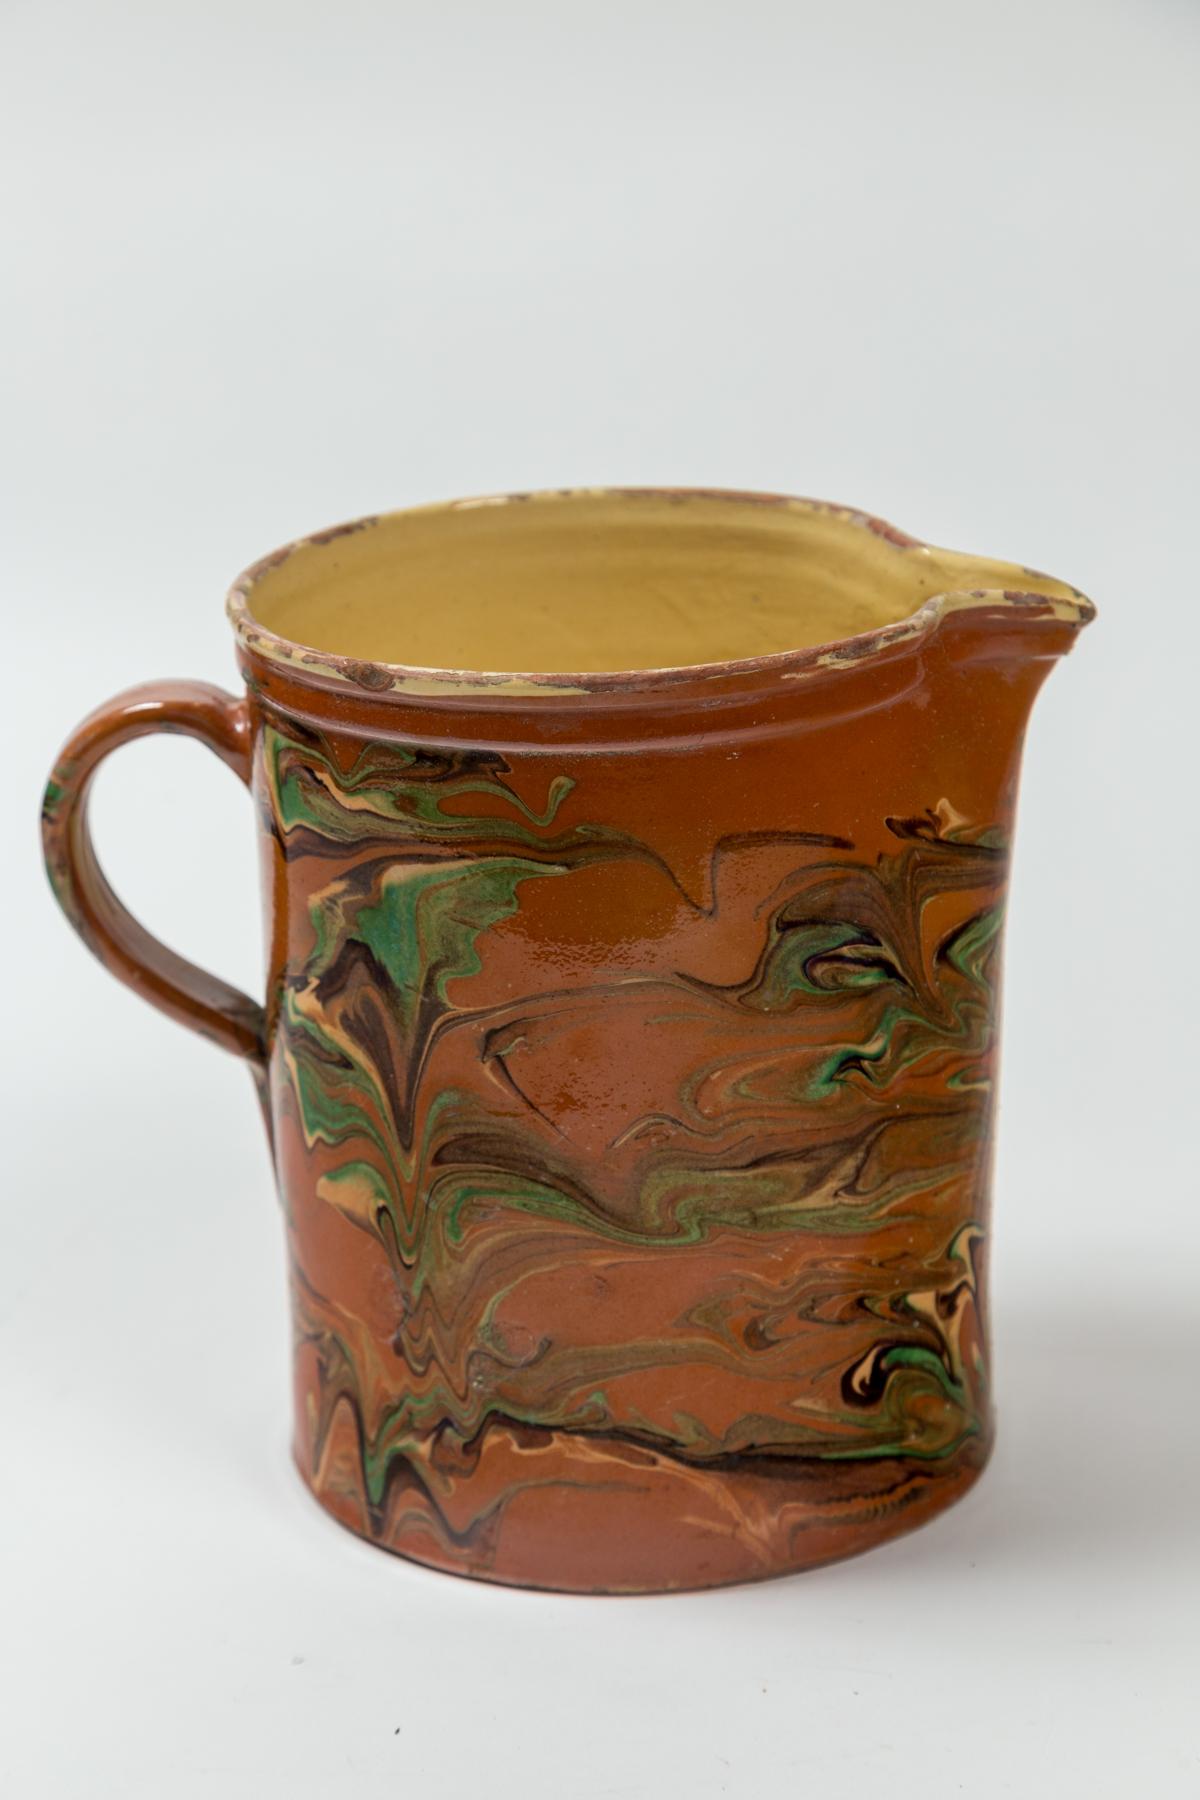 Antique Large Jaspé Pottery Pitcher, Late 19th Century, France. An exceptionally large size pitcher with striking marbleized slip application. From the Savoie region of France.